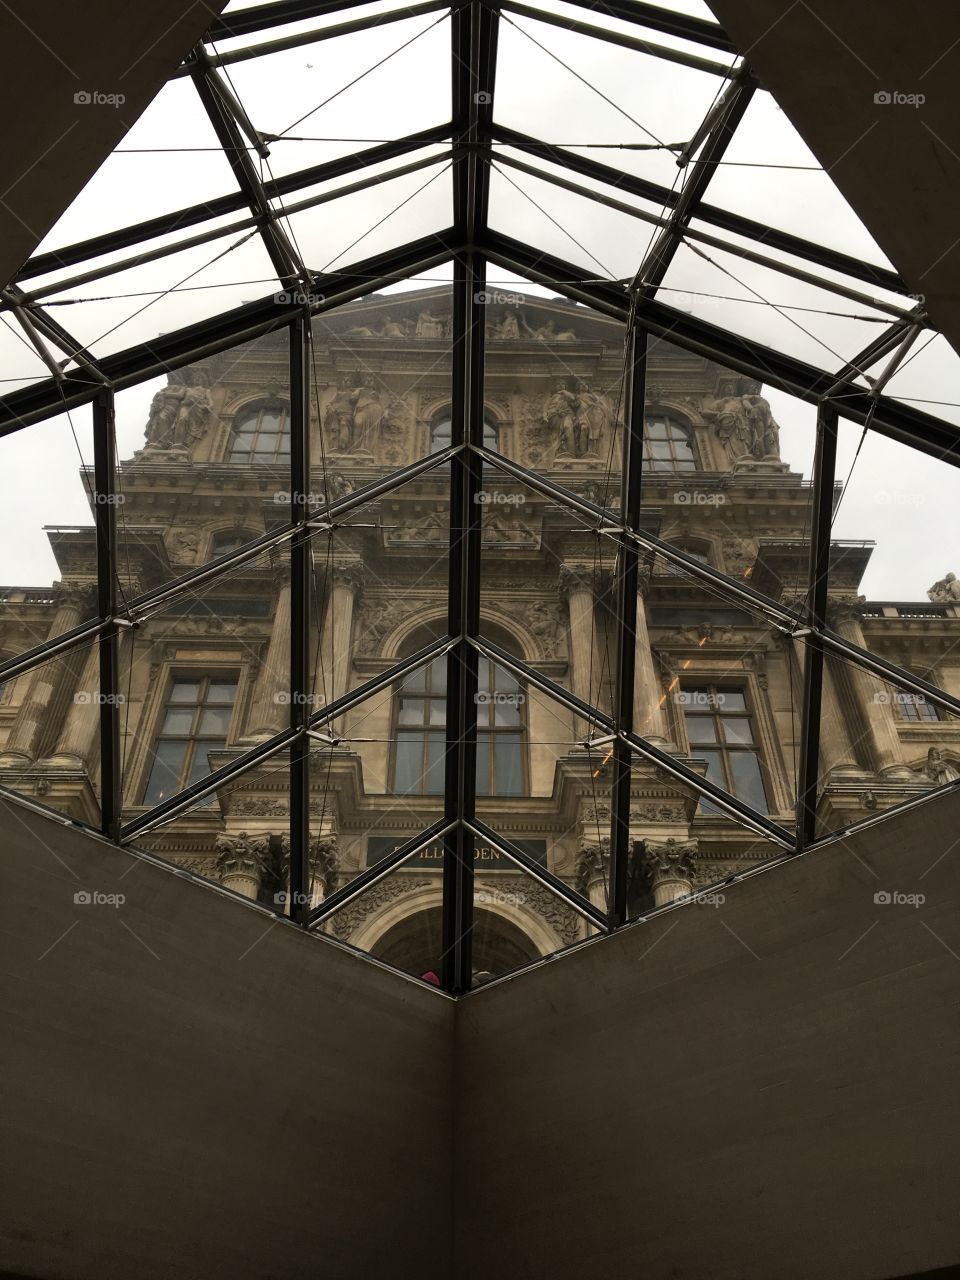 Pyramid Windows of the Louvre 